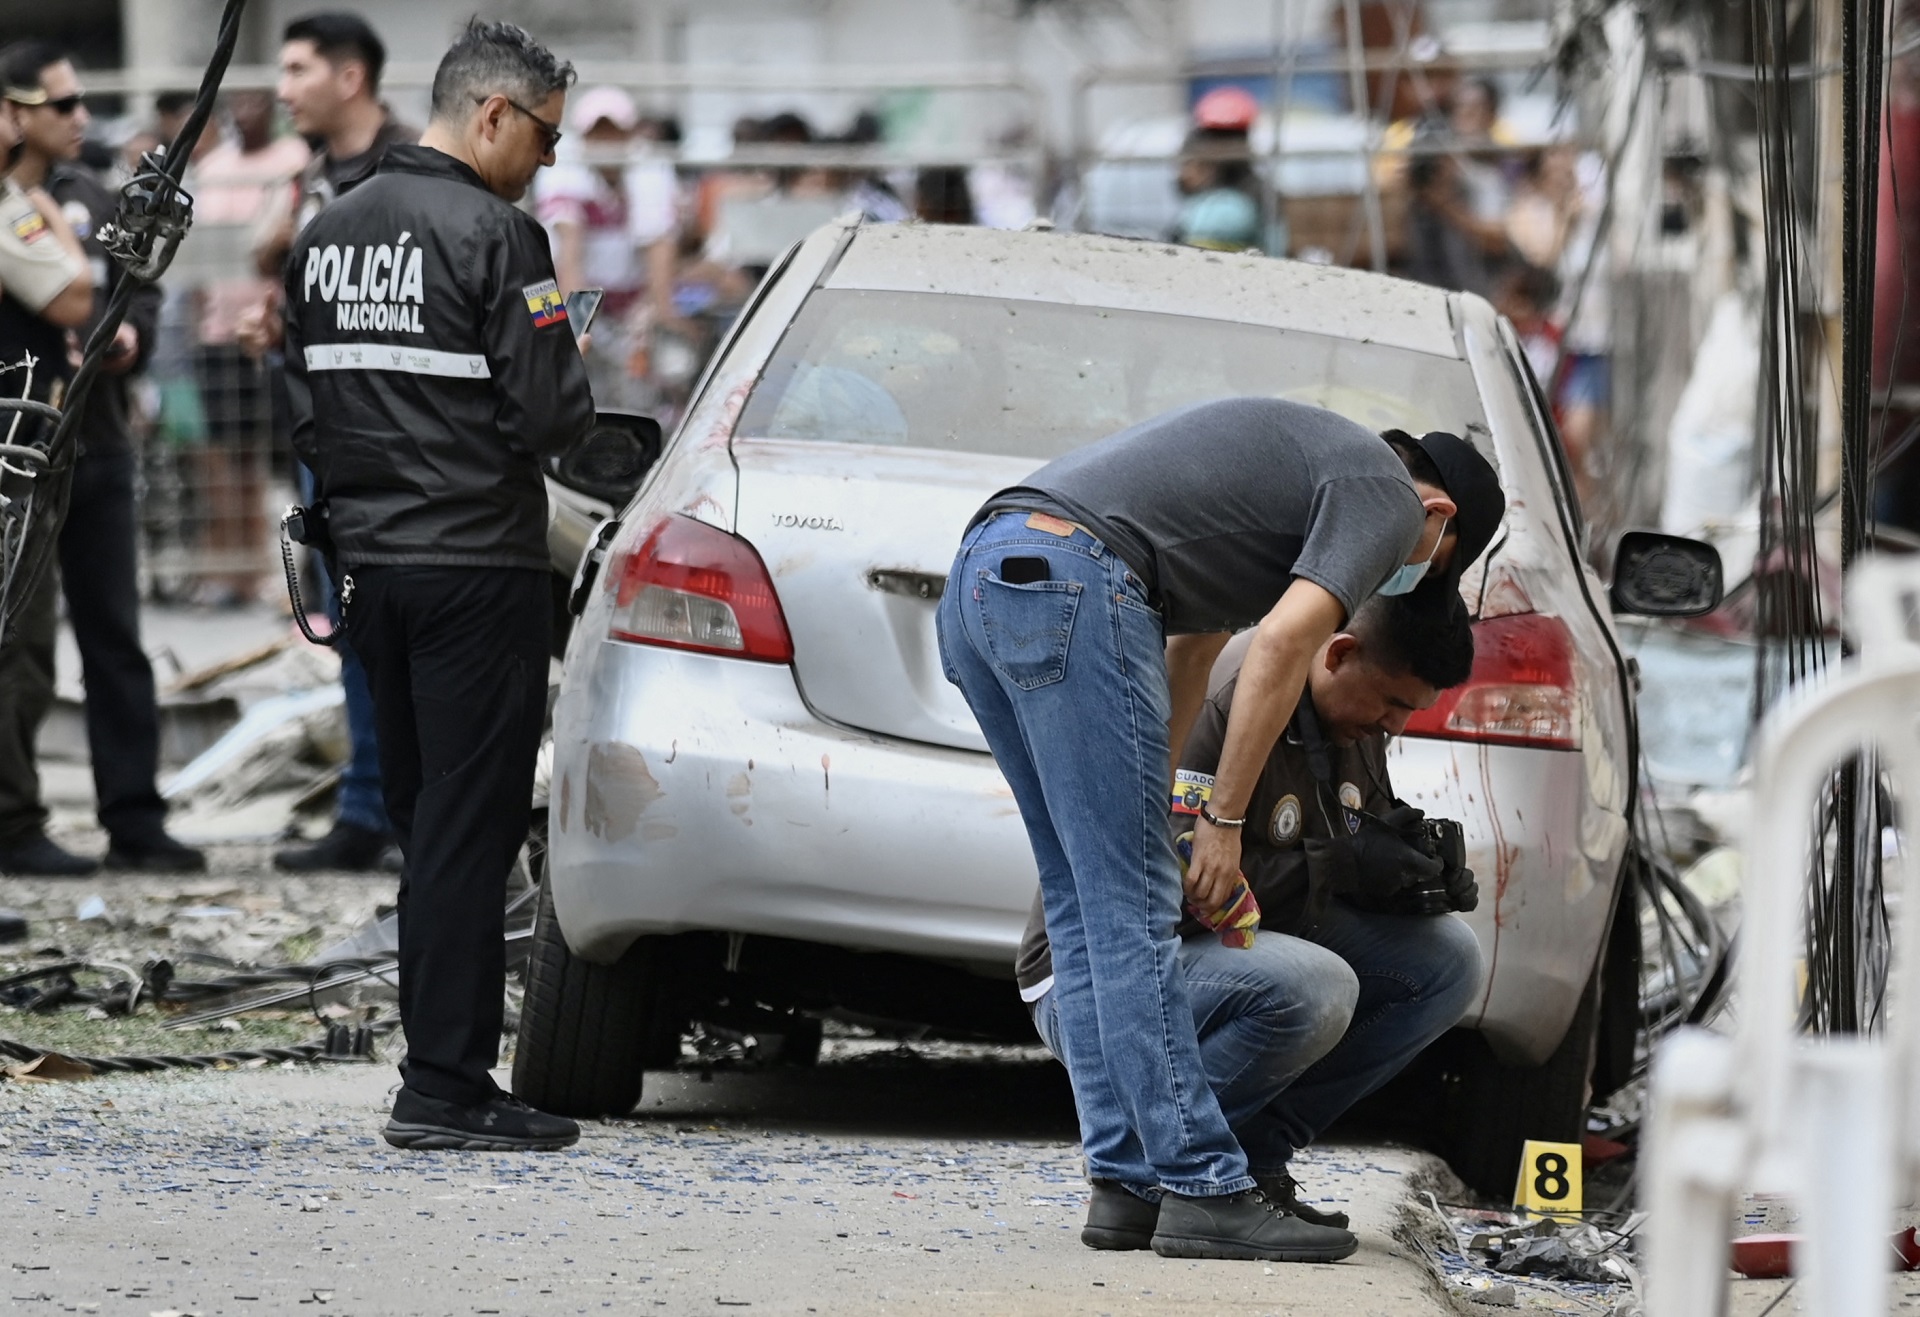 Members of the National Police inspect the site of an explosion, which the Ecuadorian government attributes to organized crime, in the south of Guayaquil, Ecuador, on August 14, 2022 (AFP)